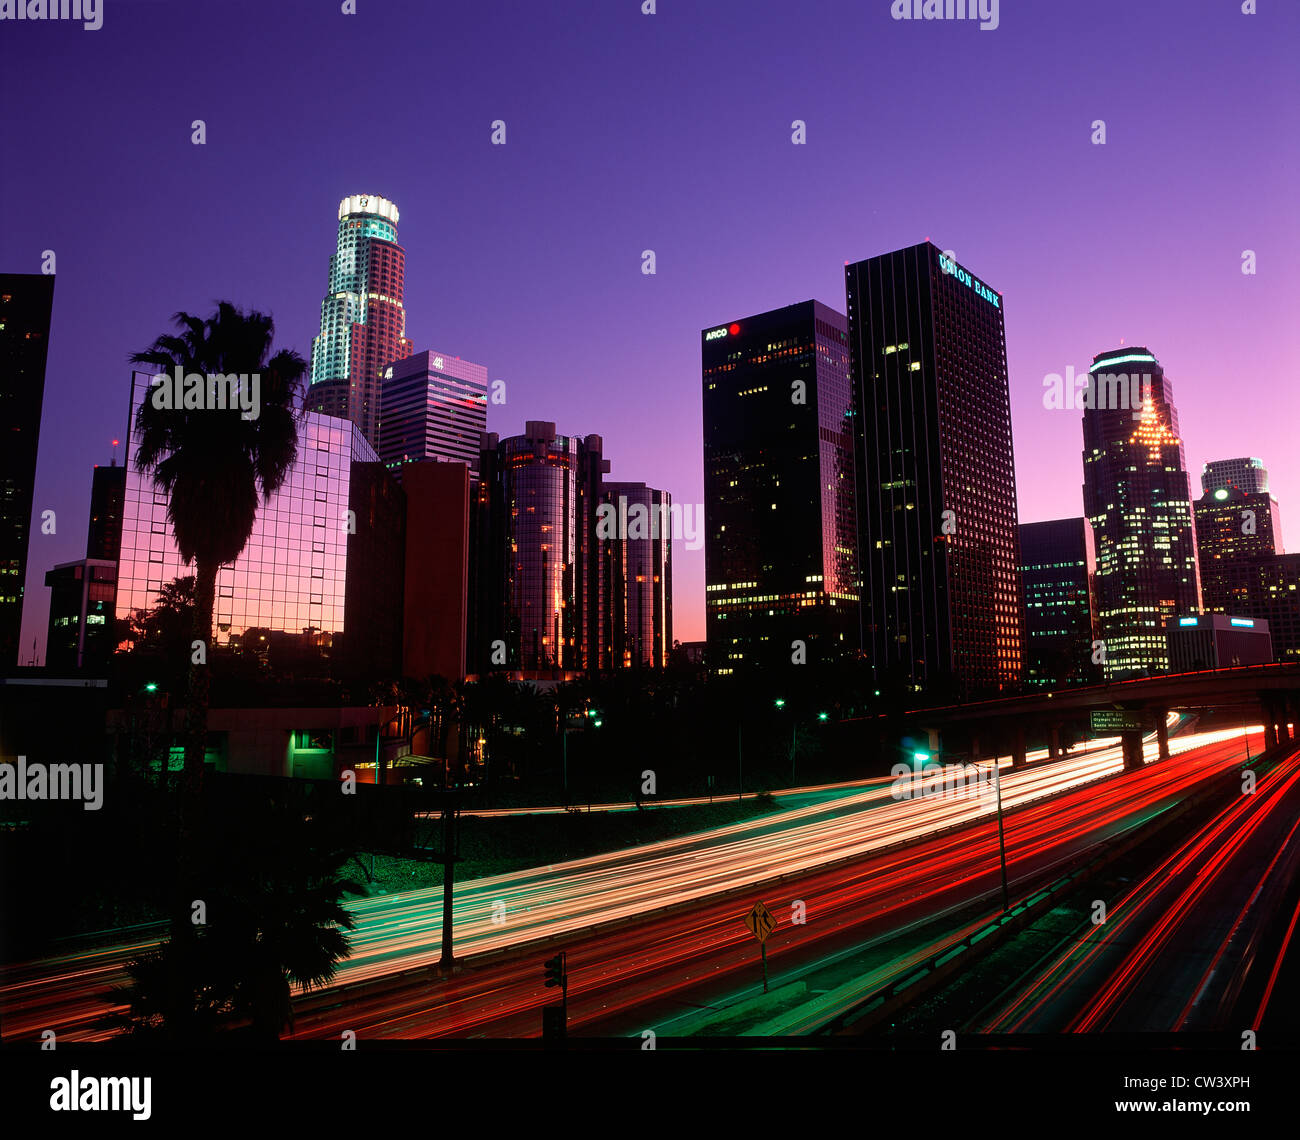 Abstract of the Harbor Freeway with Los Angeles skyline at night, California Stock Photo